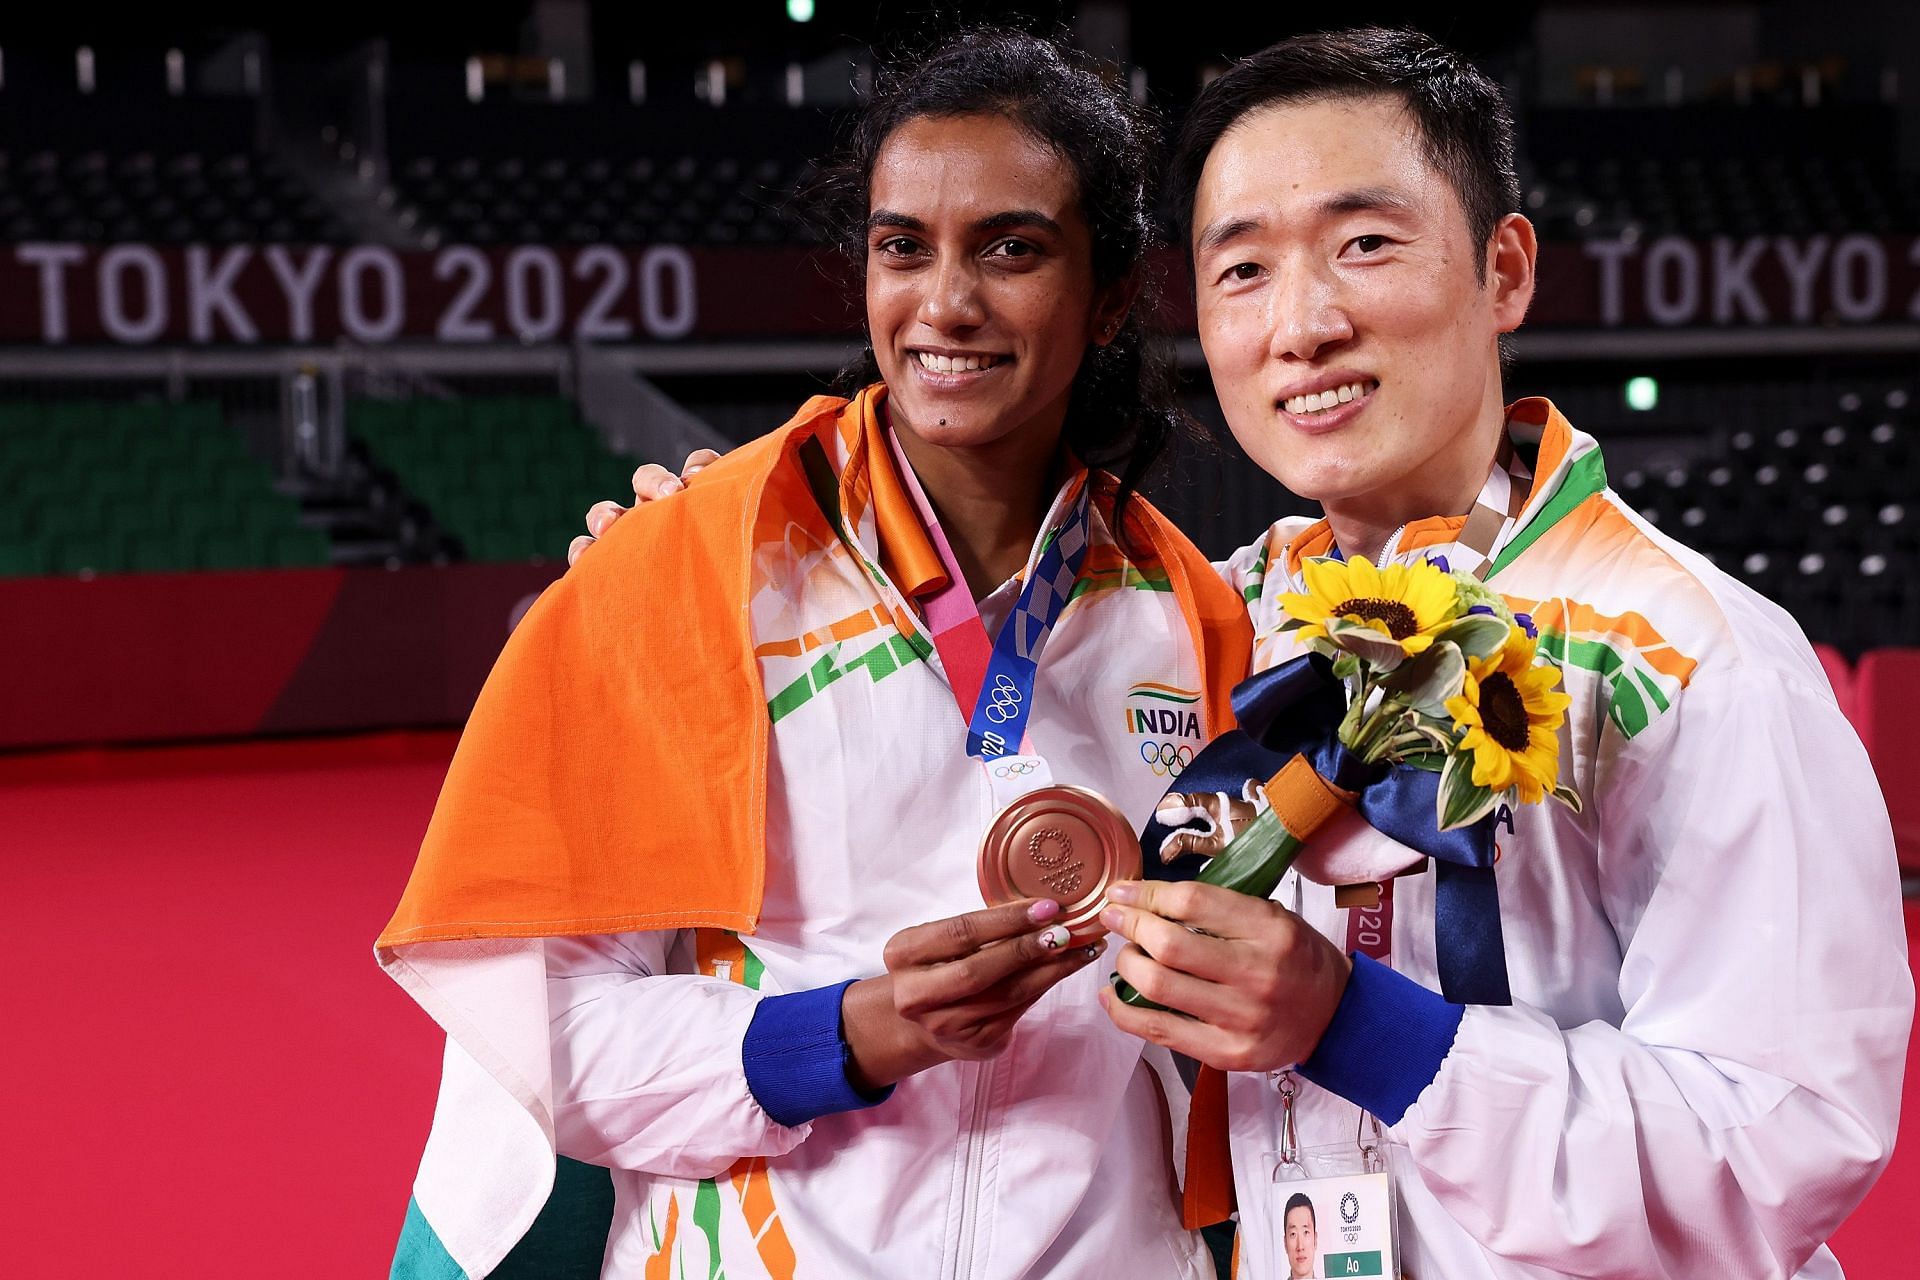 PV Sindhu with her coach Park Tae-sang after winning the 2020 Tokyo Olympic bronze medal